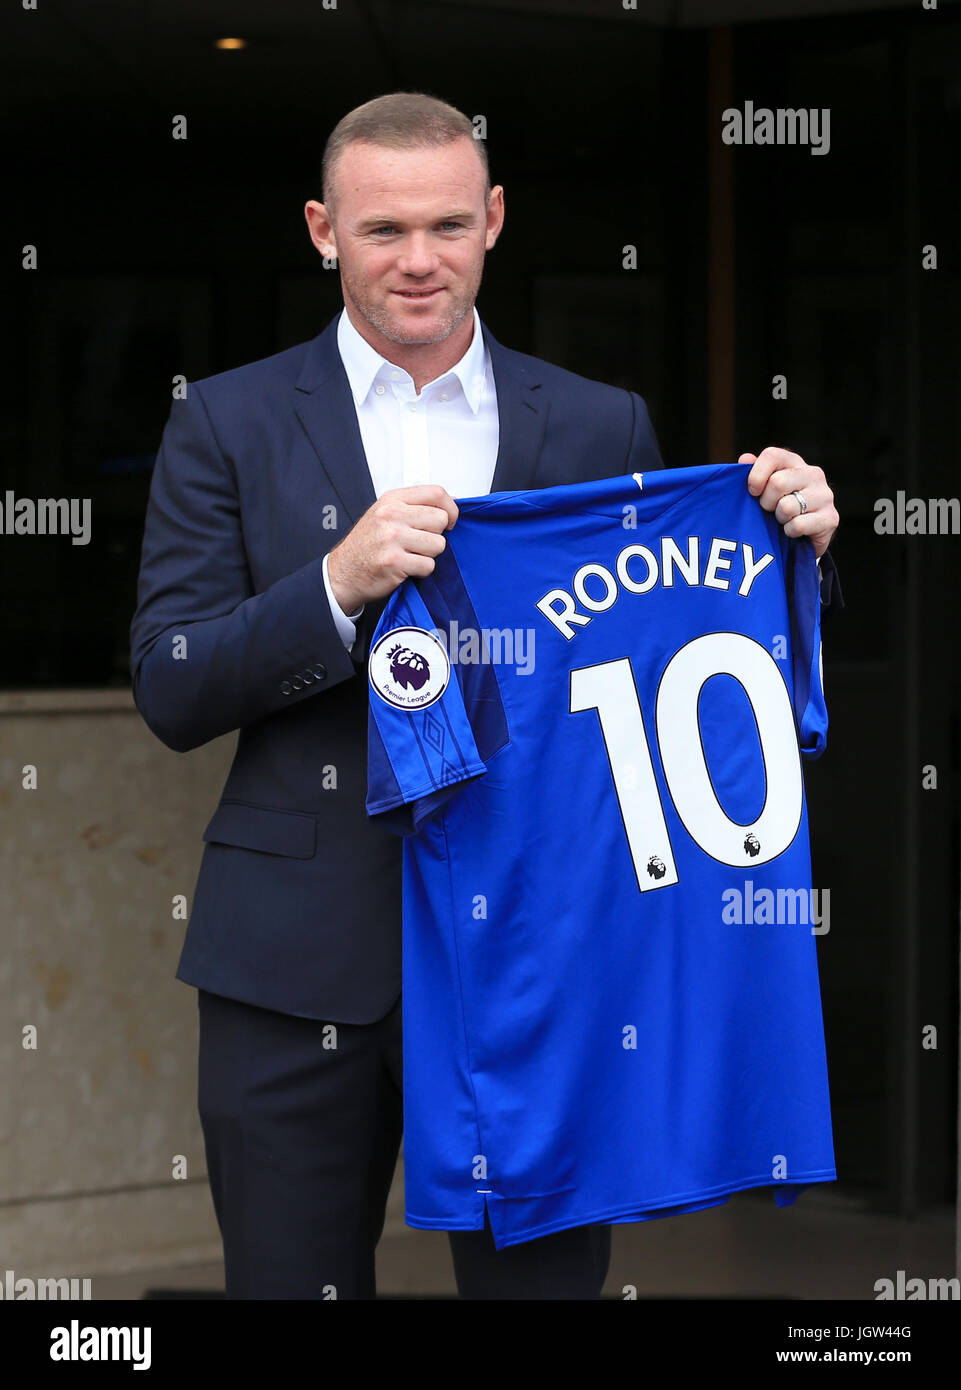 New Everton signing Wayne Rooney holds up an Everton shirt after the press  conference at Goodison Park, Liverpool Stock Photo - Alamy